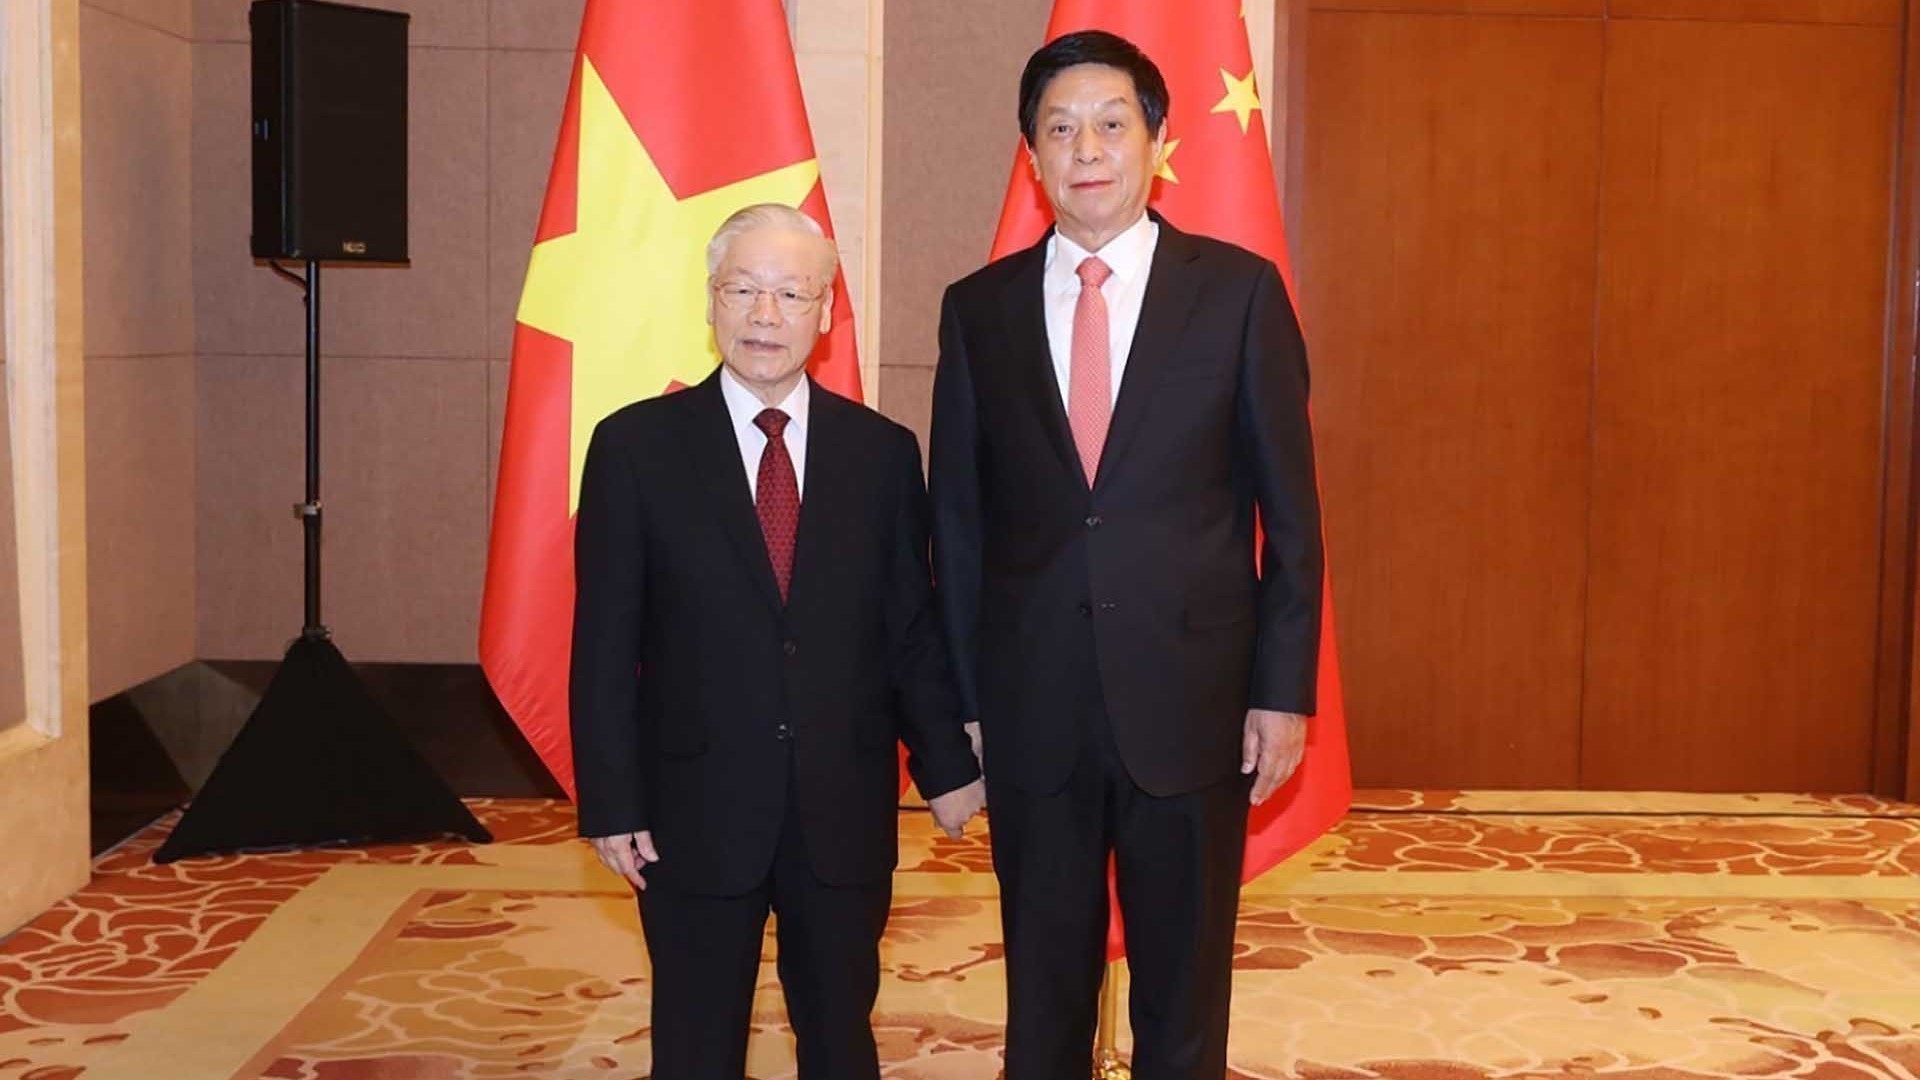 To step up exchange between Vietnamese National Assembly and China's NPC